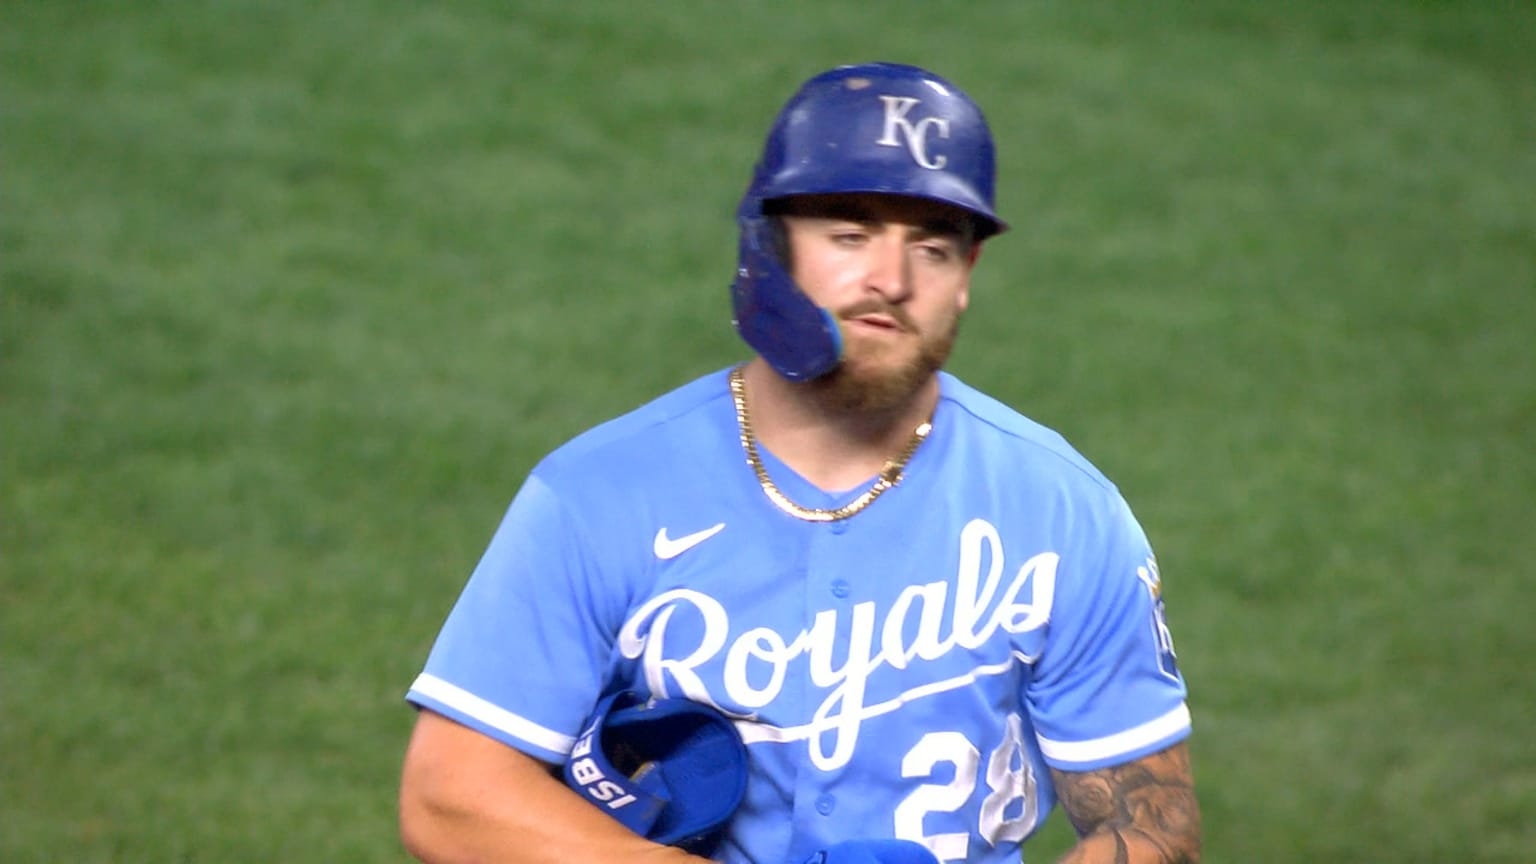 KC Royals: It was Kyle Isbel, but looked like Gordon